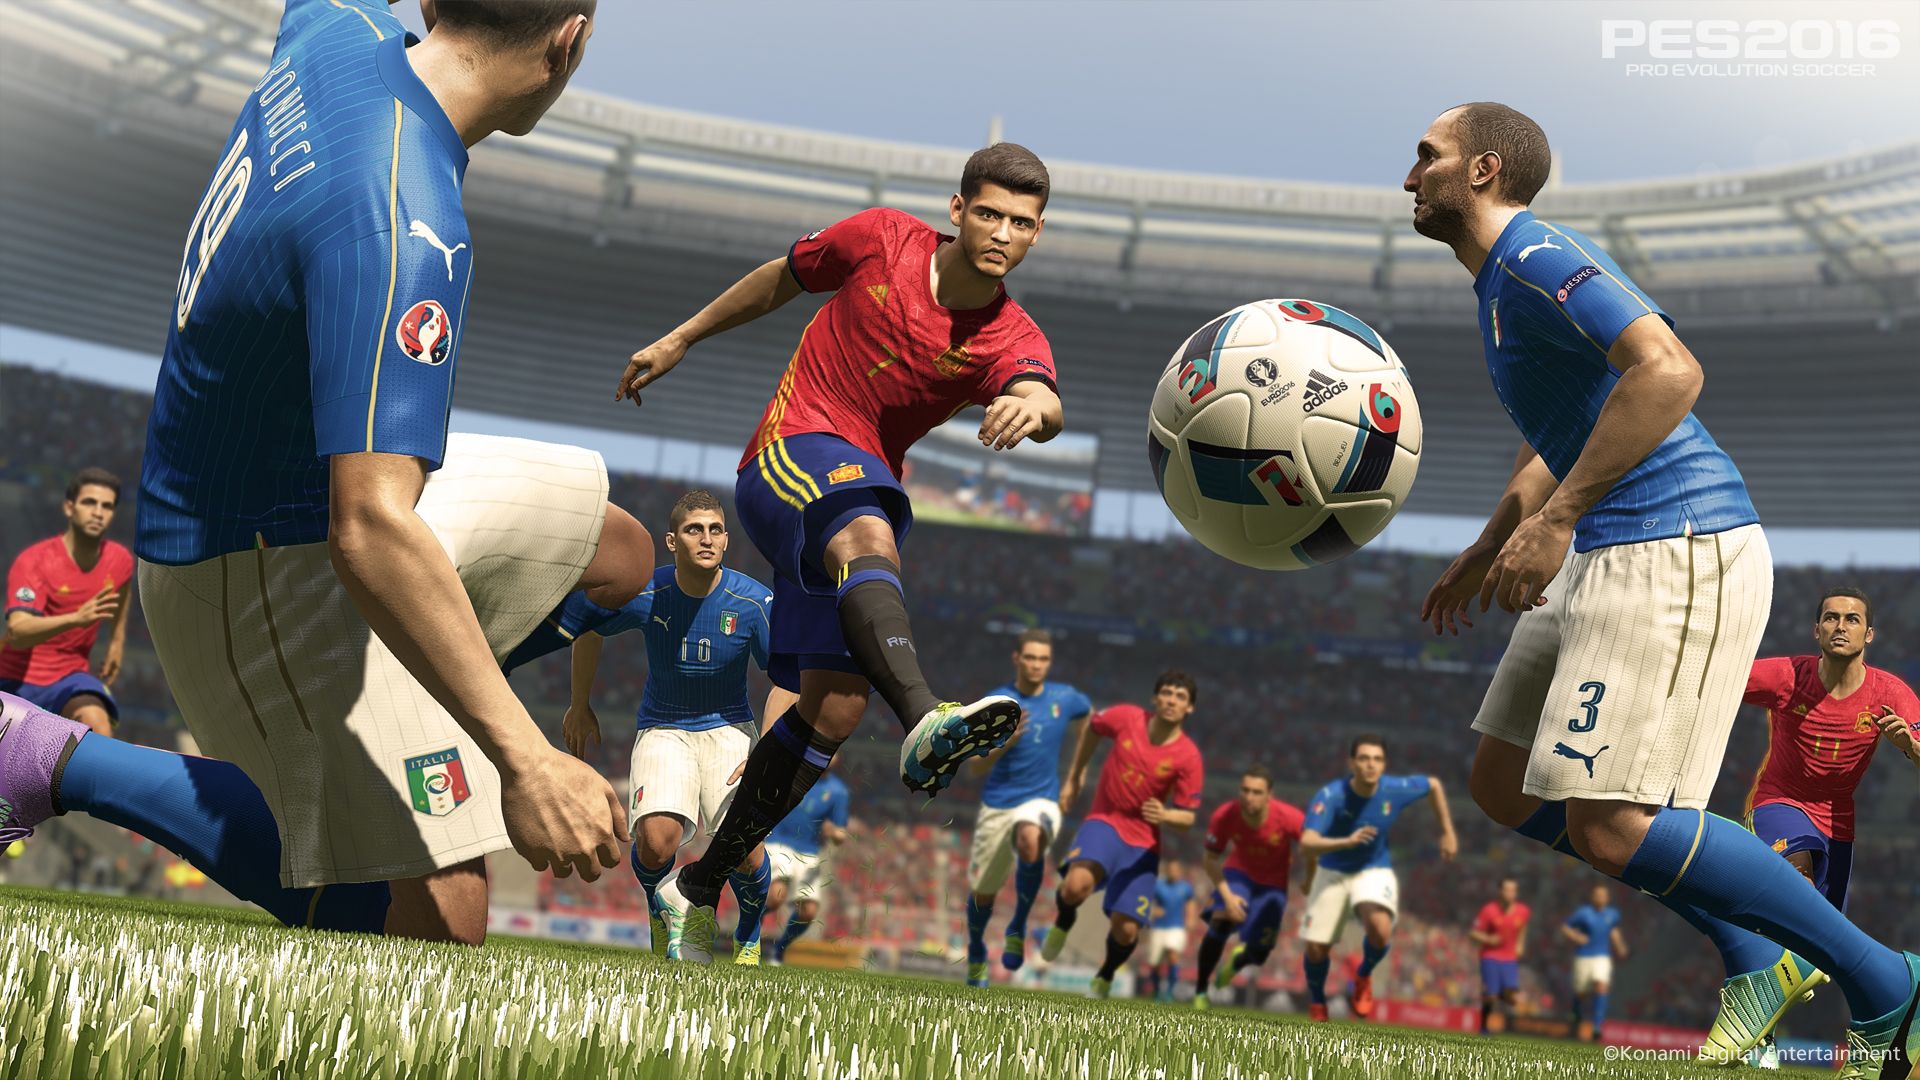 PES 2017 release date, news, cover stars and everything you need